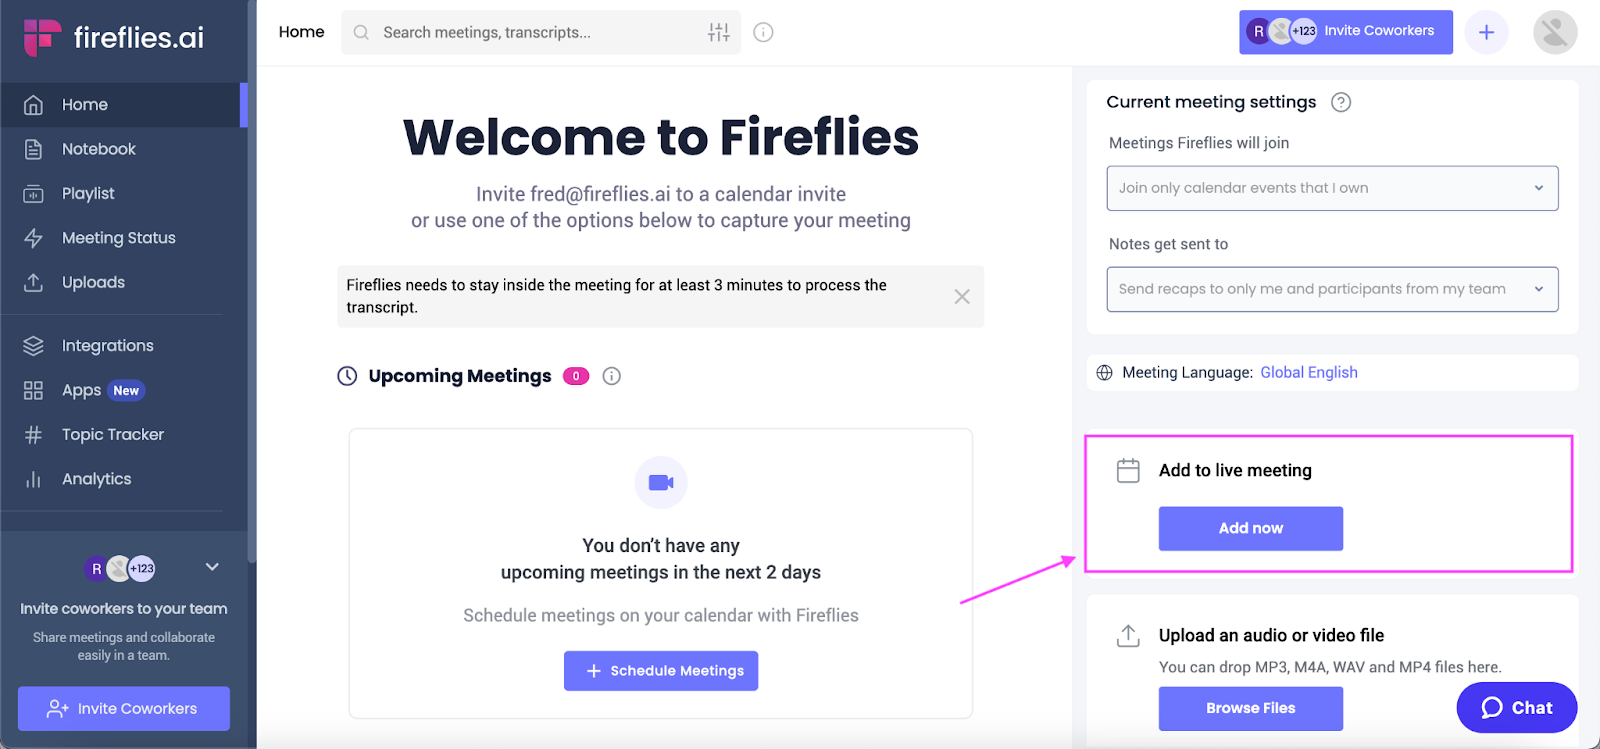 Use Fireflies to transcribe your Zoom meeting - Add Fireflies to live meeting